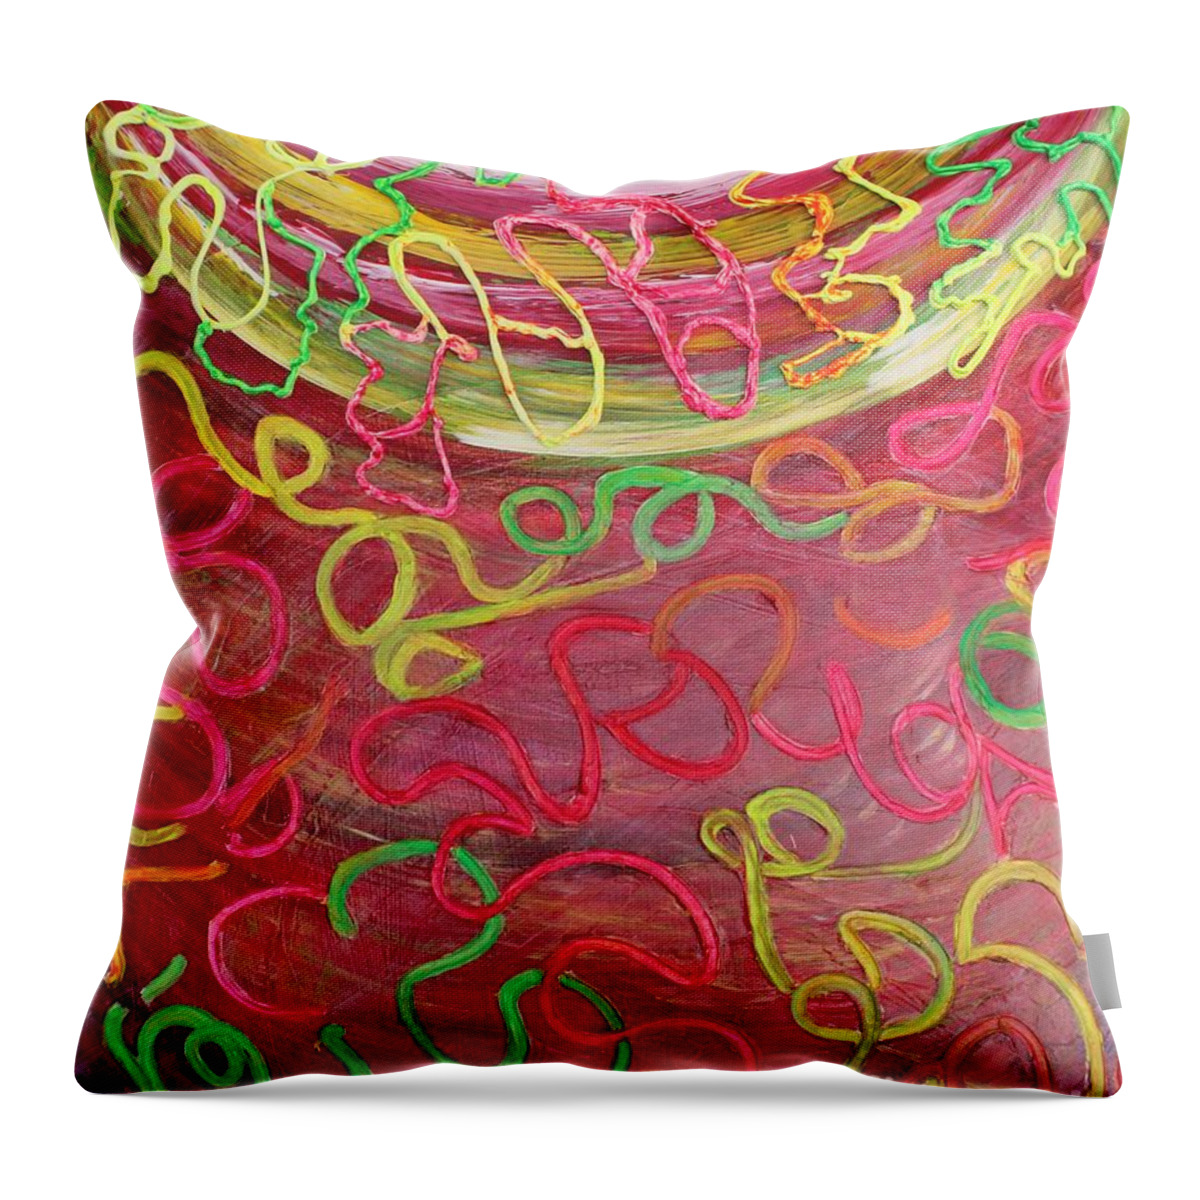 Neon Strings Throw Pillow featuring the painting Neon strings by Sarahleah Hankes